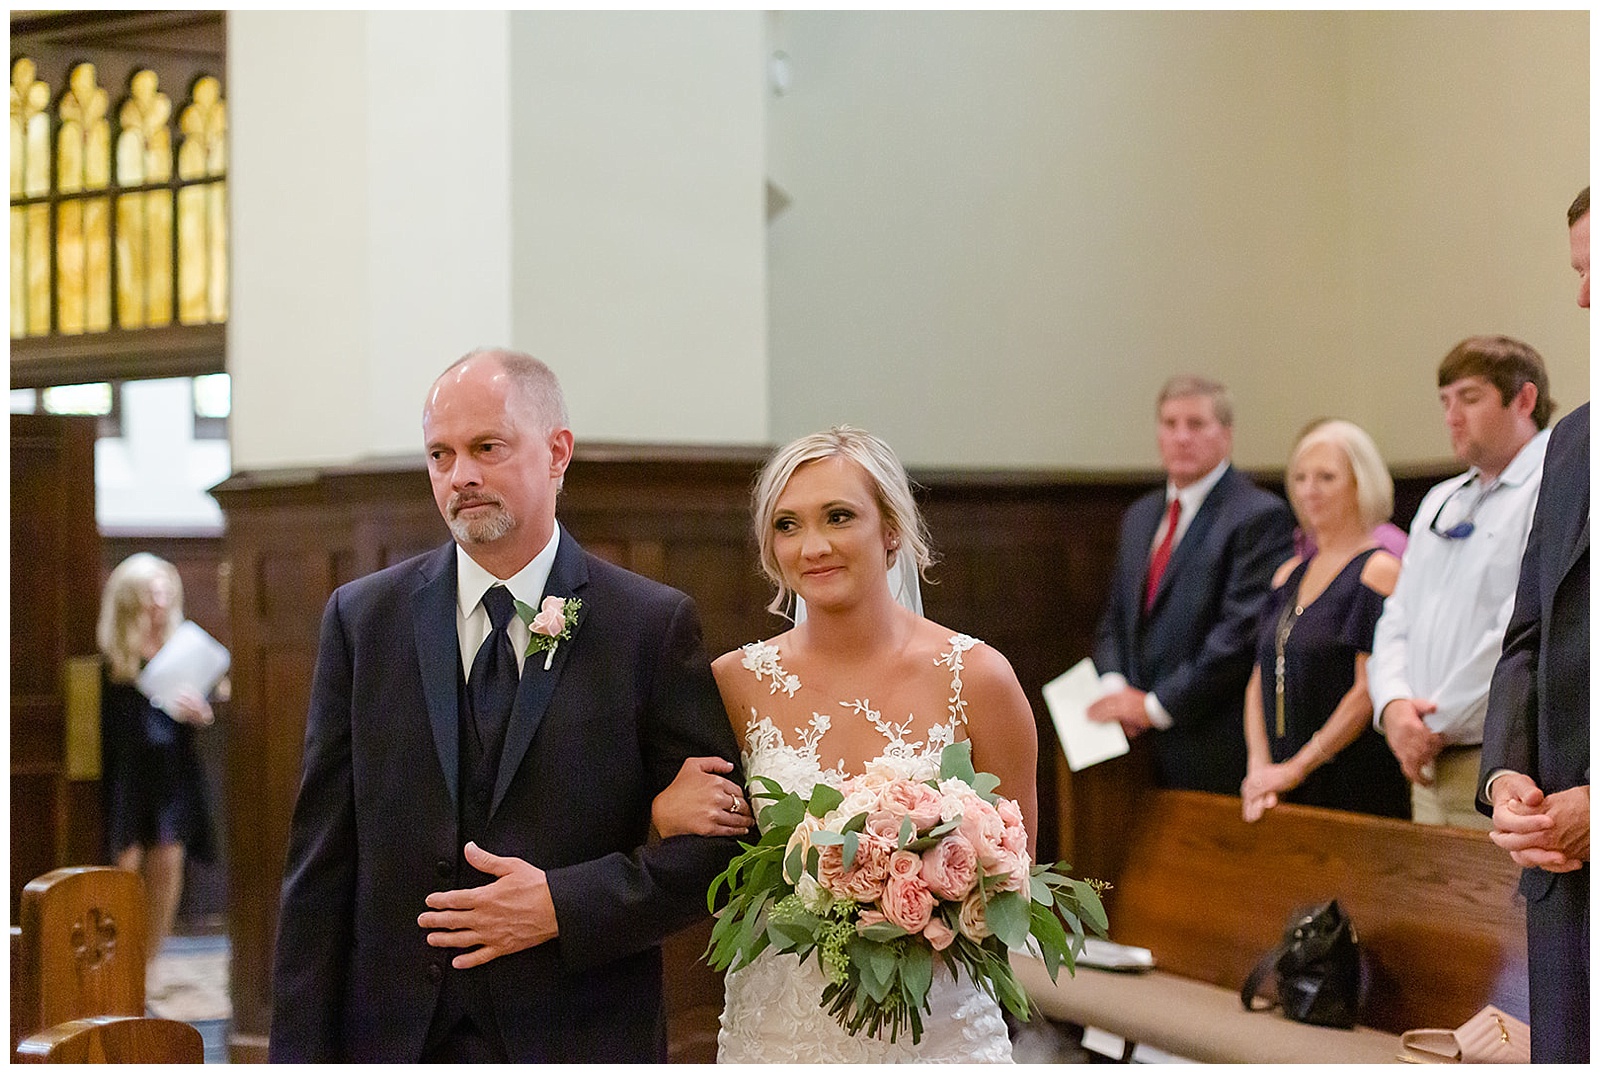 A Meridian, MS Wedding at The Max + First Presbyterian 